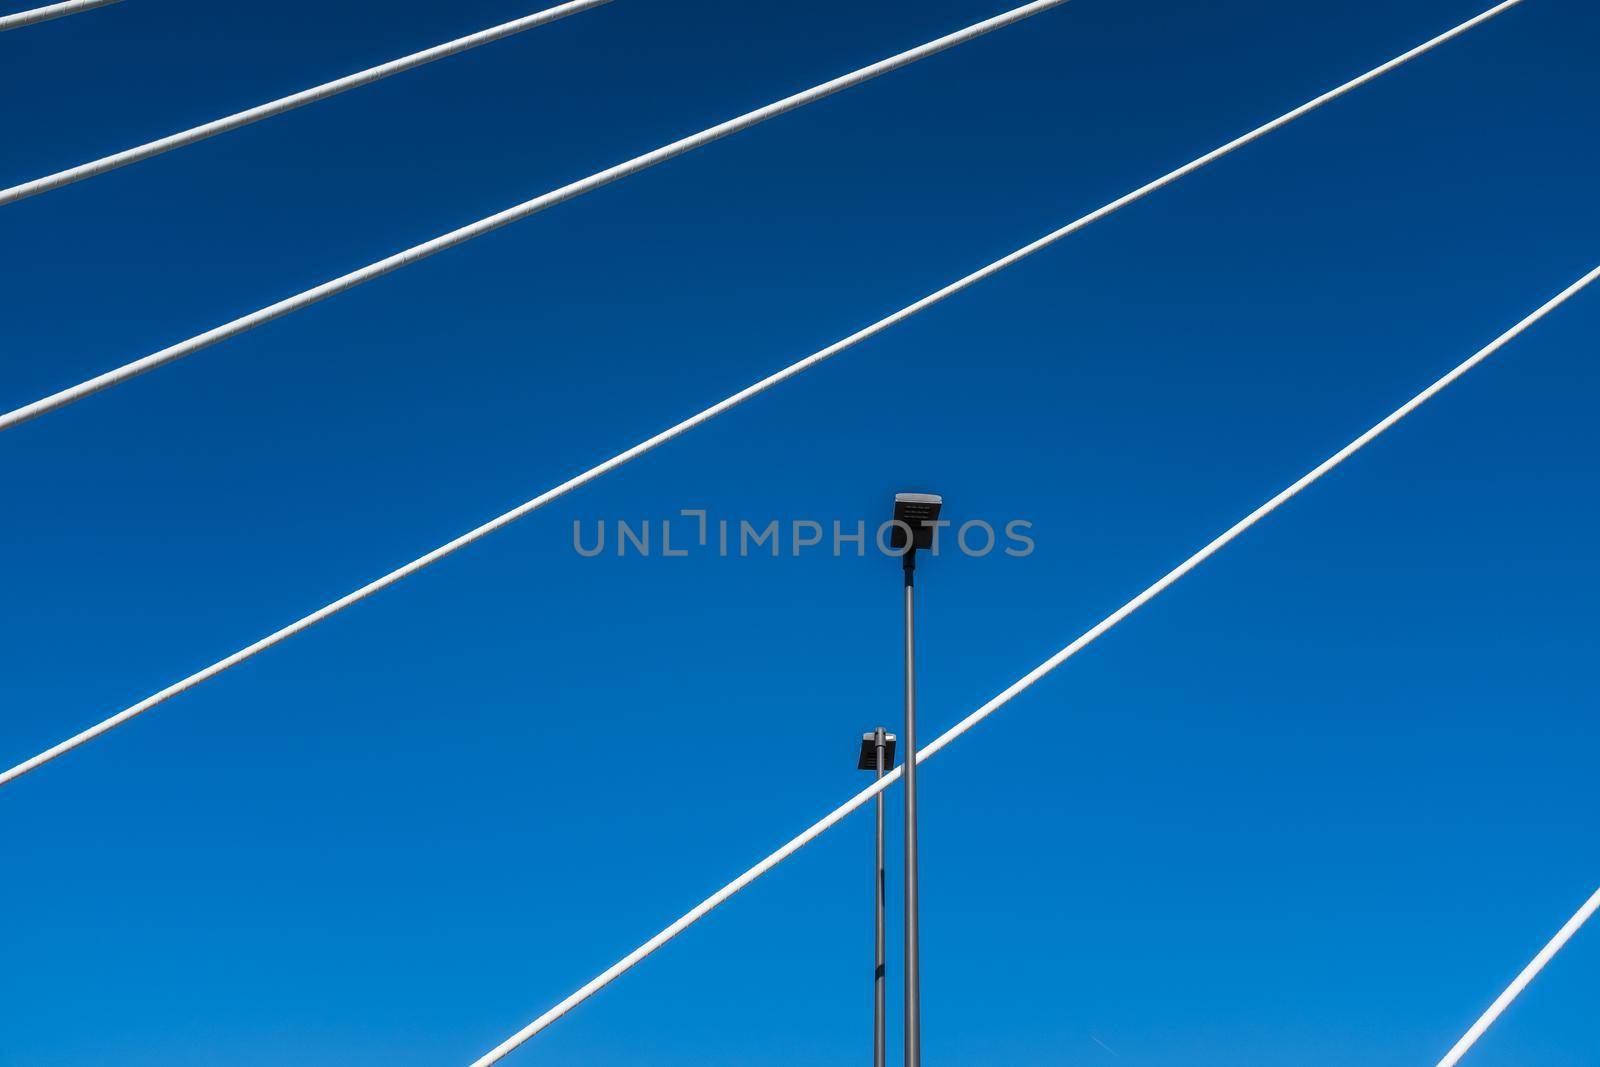 Pescara, Italy: white steel cables of a suspension bridge intersect with street lights. Abstract composition against a bright blue sky.